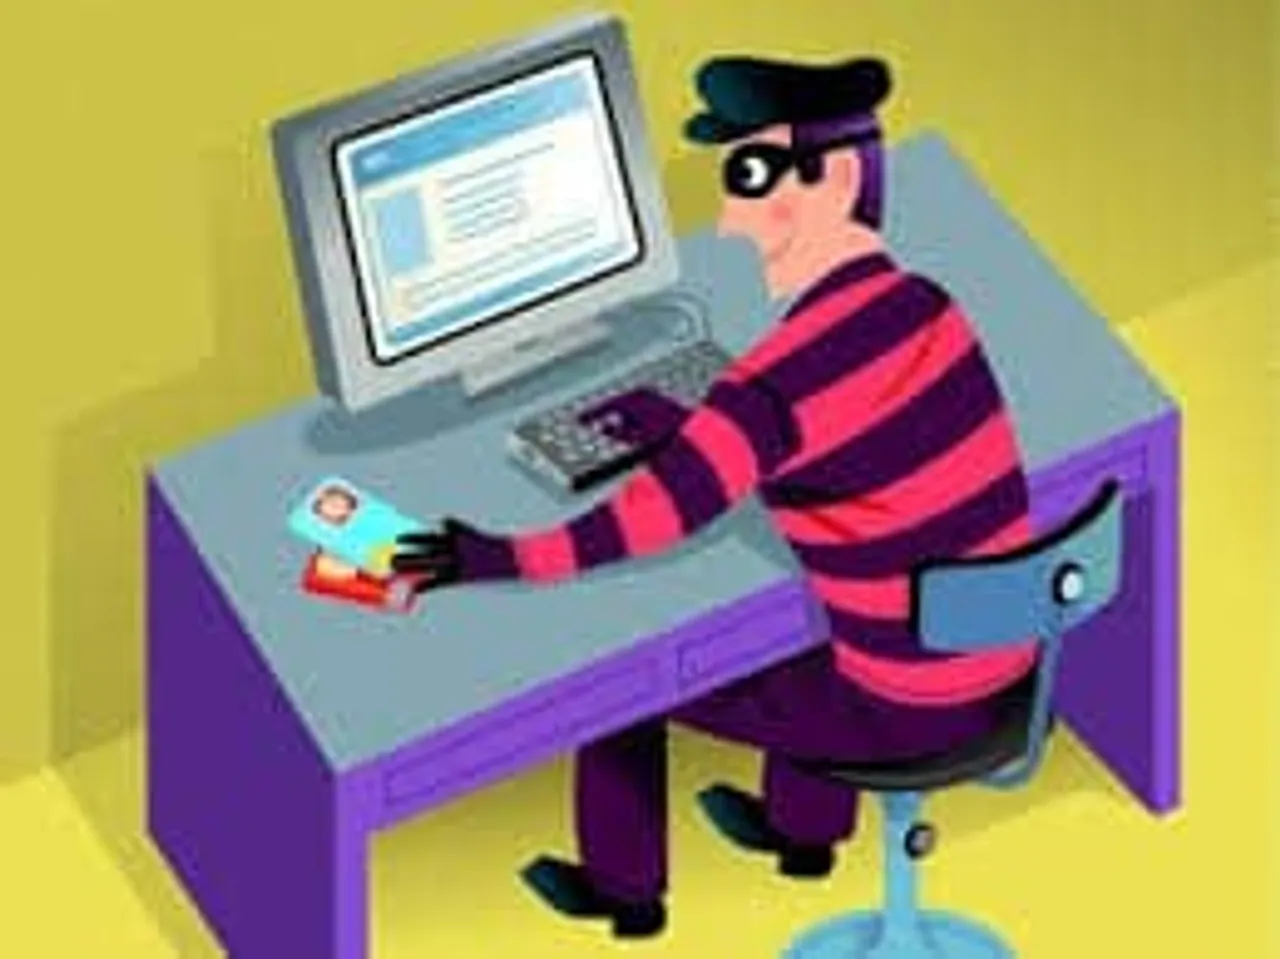 DIGITAL FRAUD: Rs. 45,000 Stolen in seconds, You could be next!